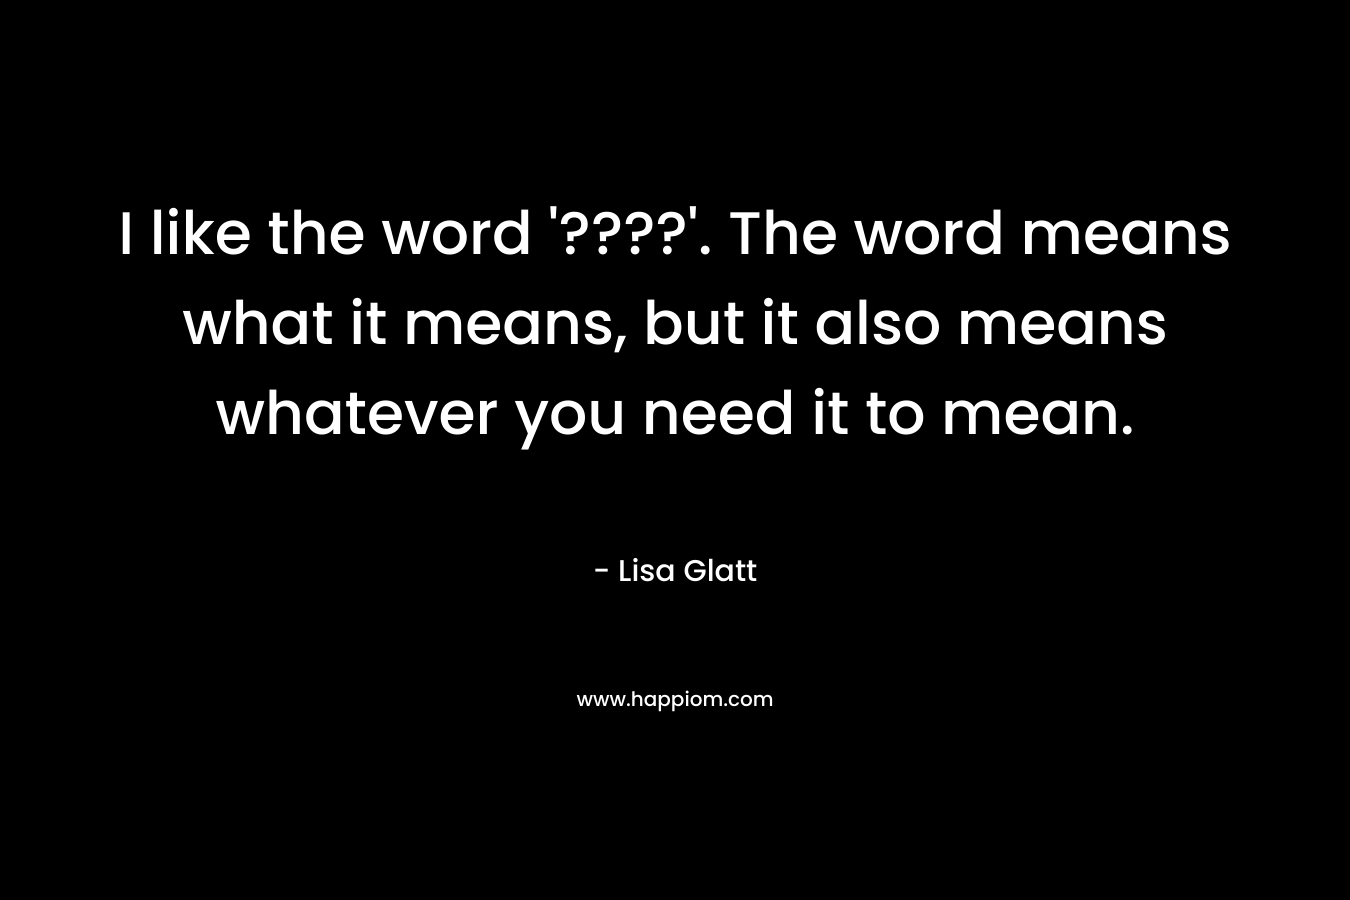 I like the word '????'. The word means what it means, but it also means whatever you need it to mean.